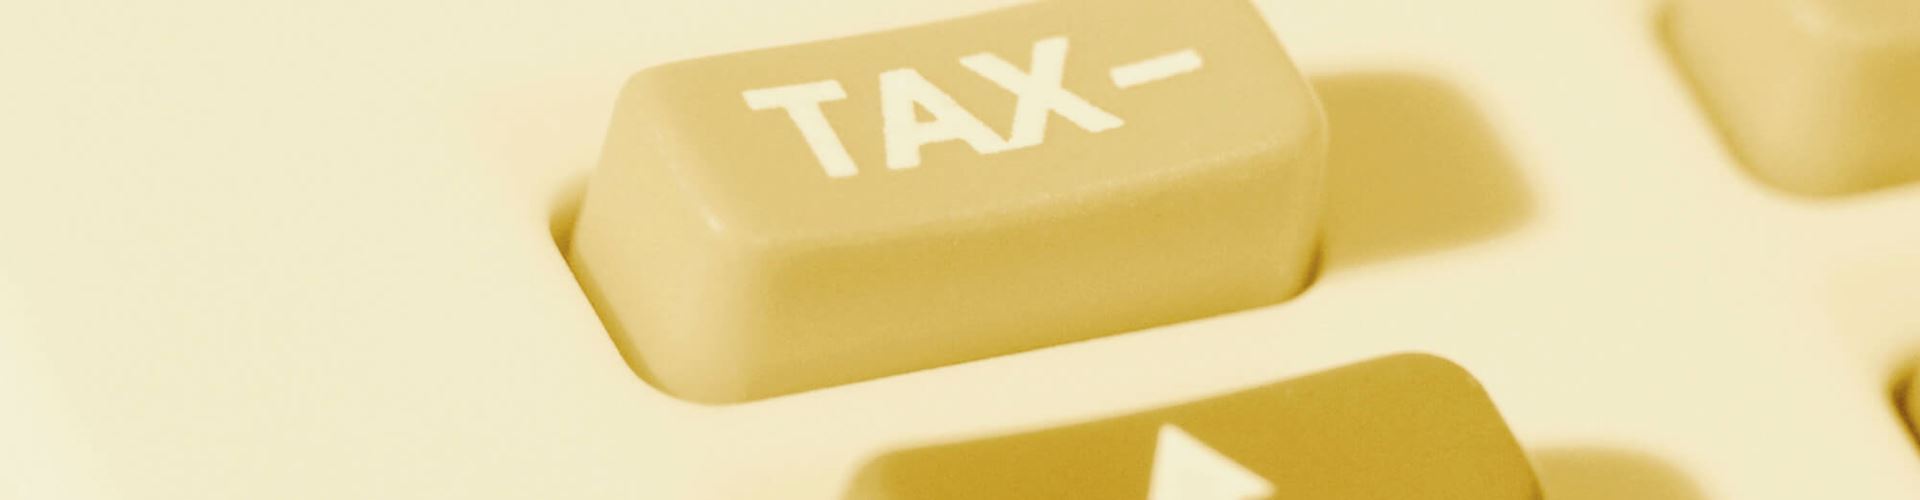 PwC issues guide with World Bank to global tax systems